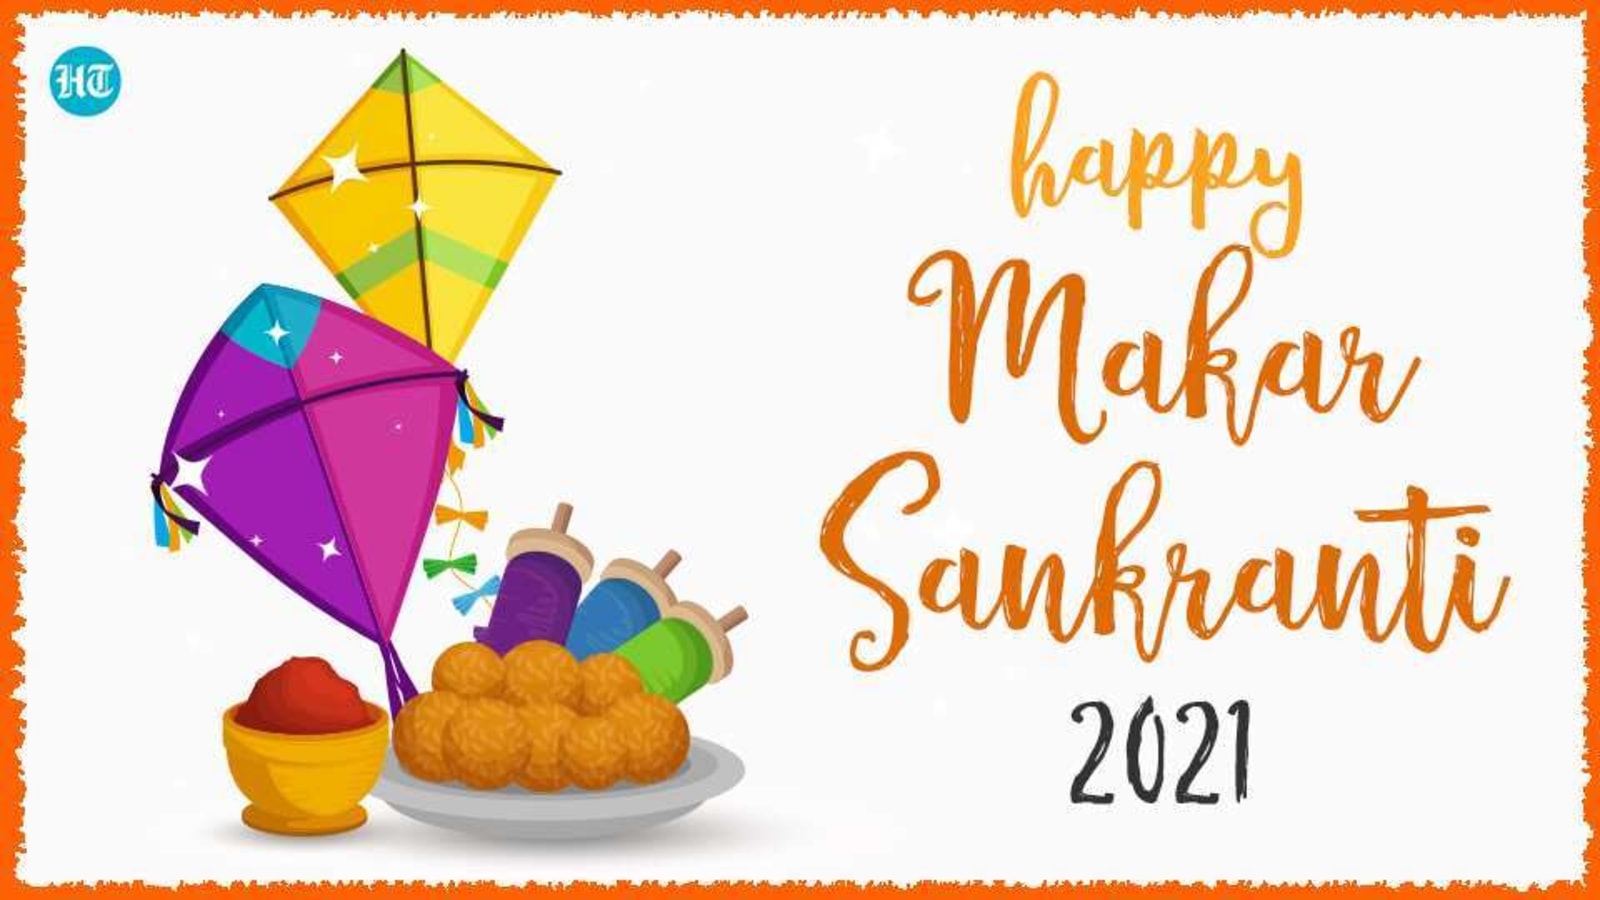 Incredible Compilation of Sankranti Images Over 999 Images in Full 4K